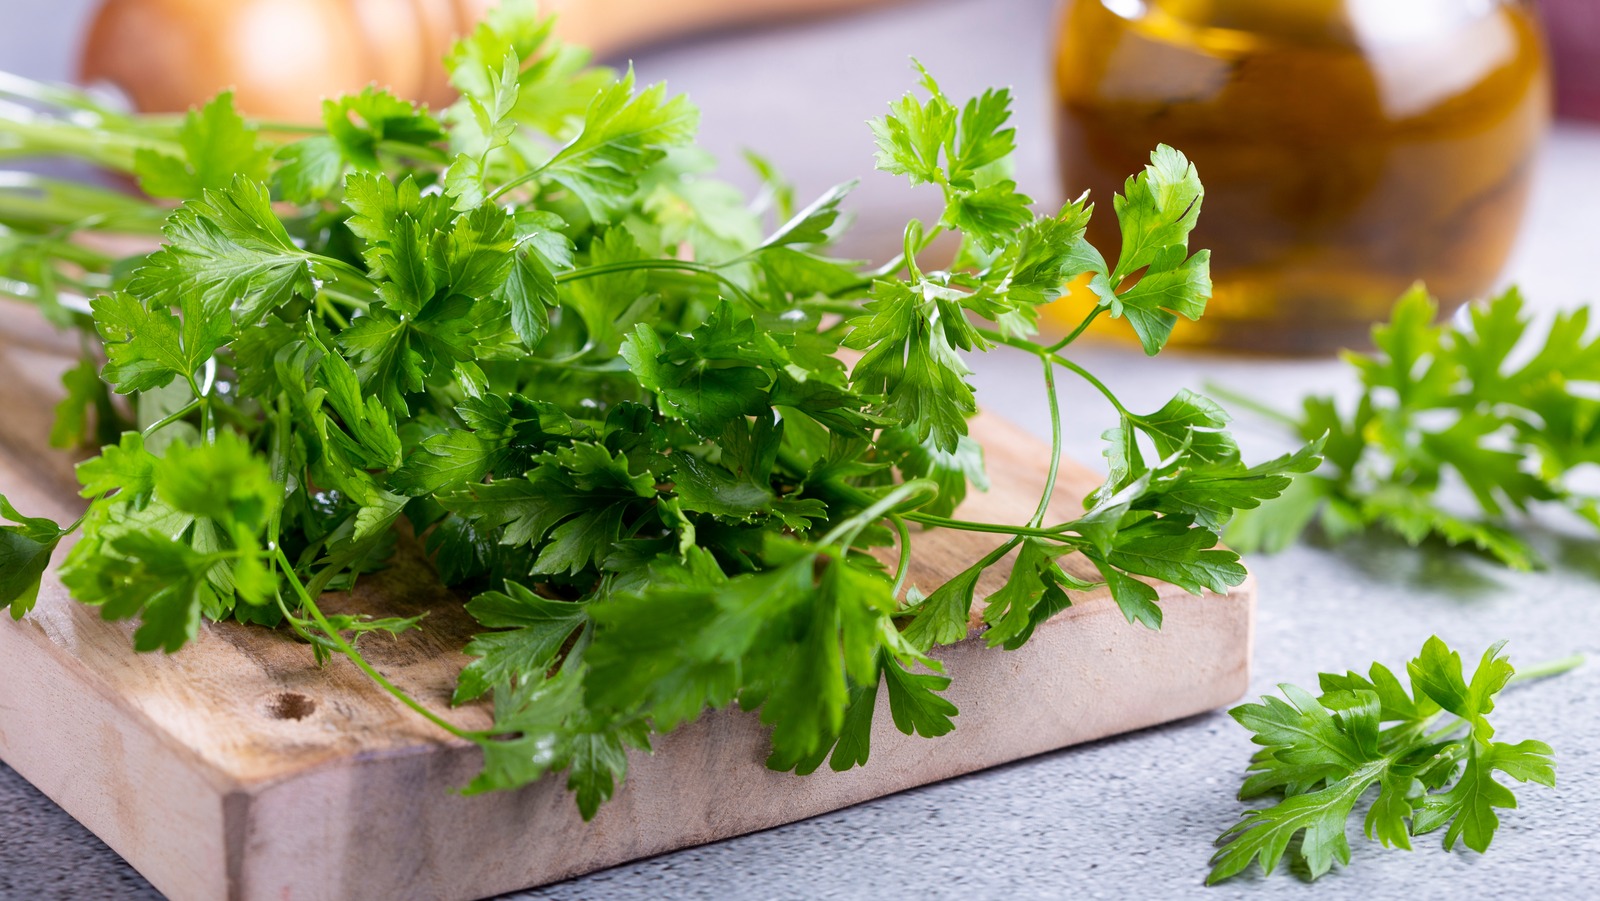 Why You Should Eat More Parsley If You’re Following The Keto Diet